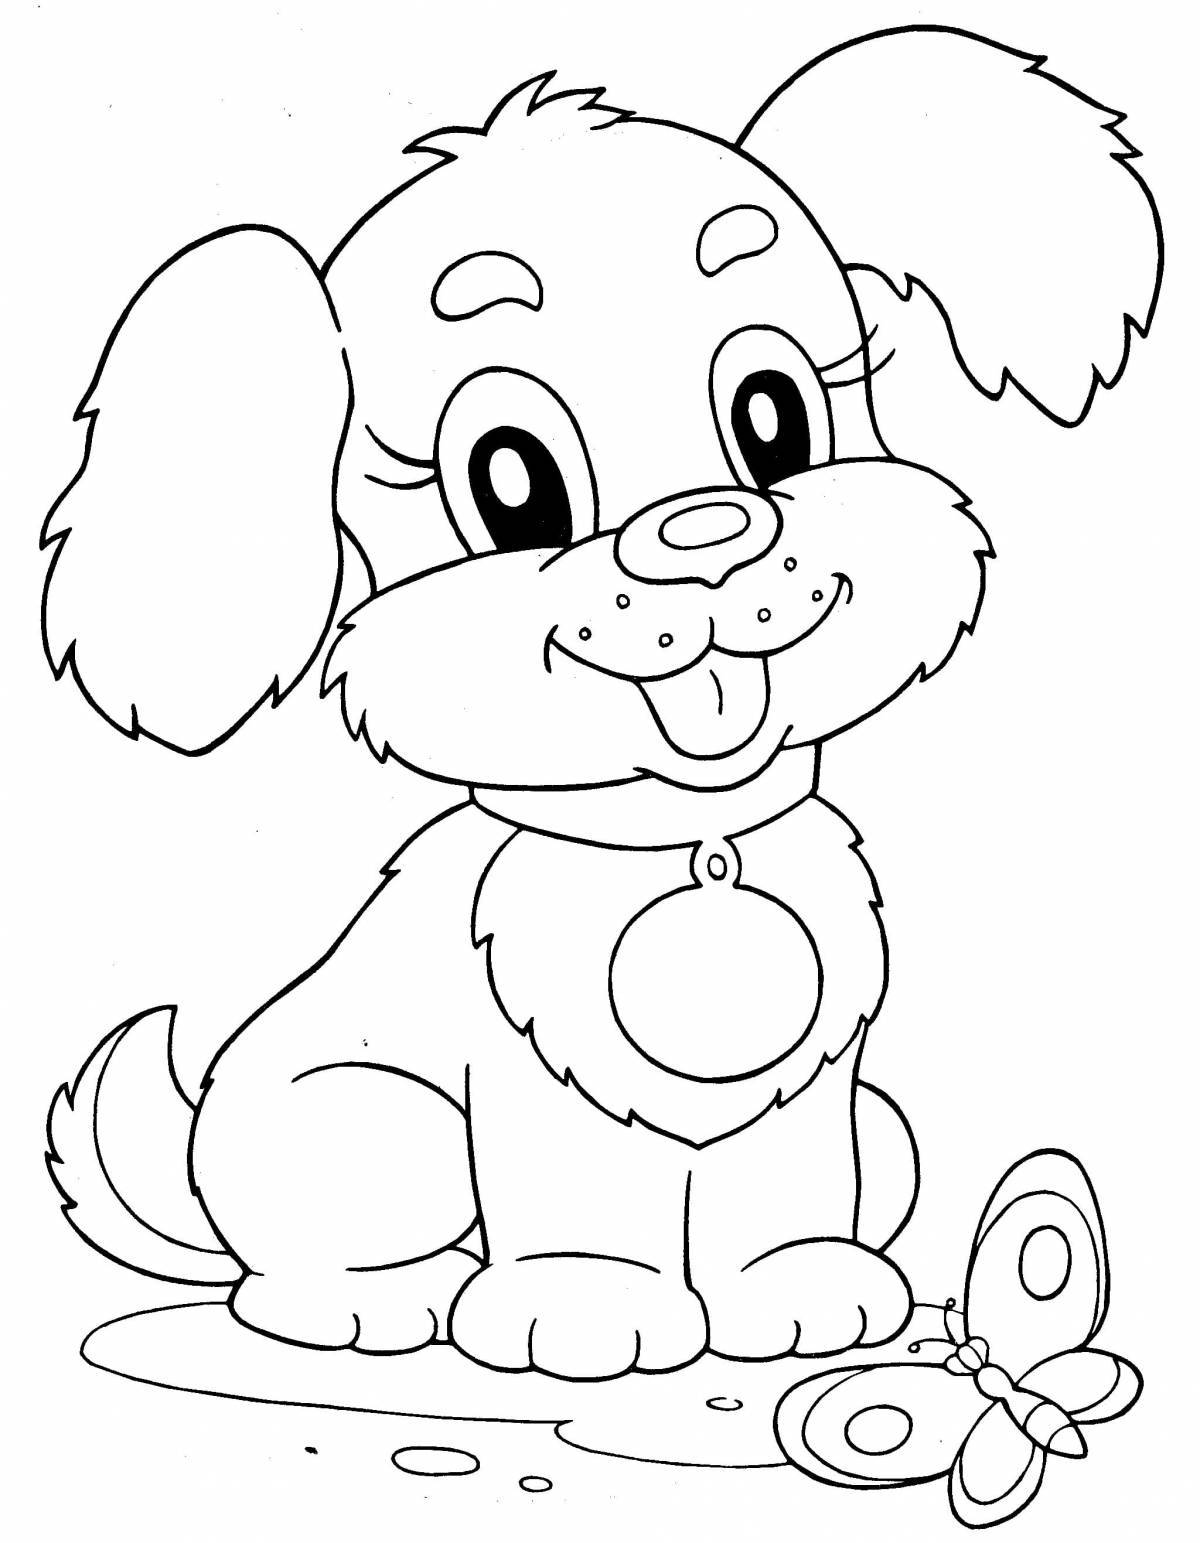 Coloring-journey free coloring pages